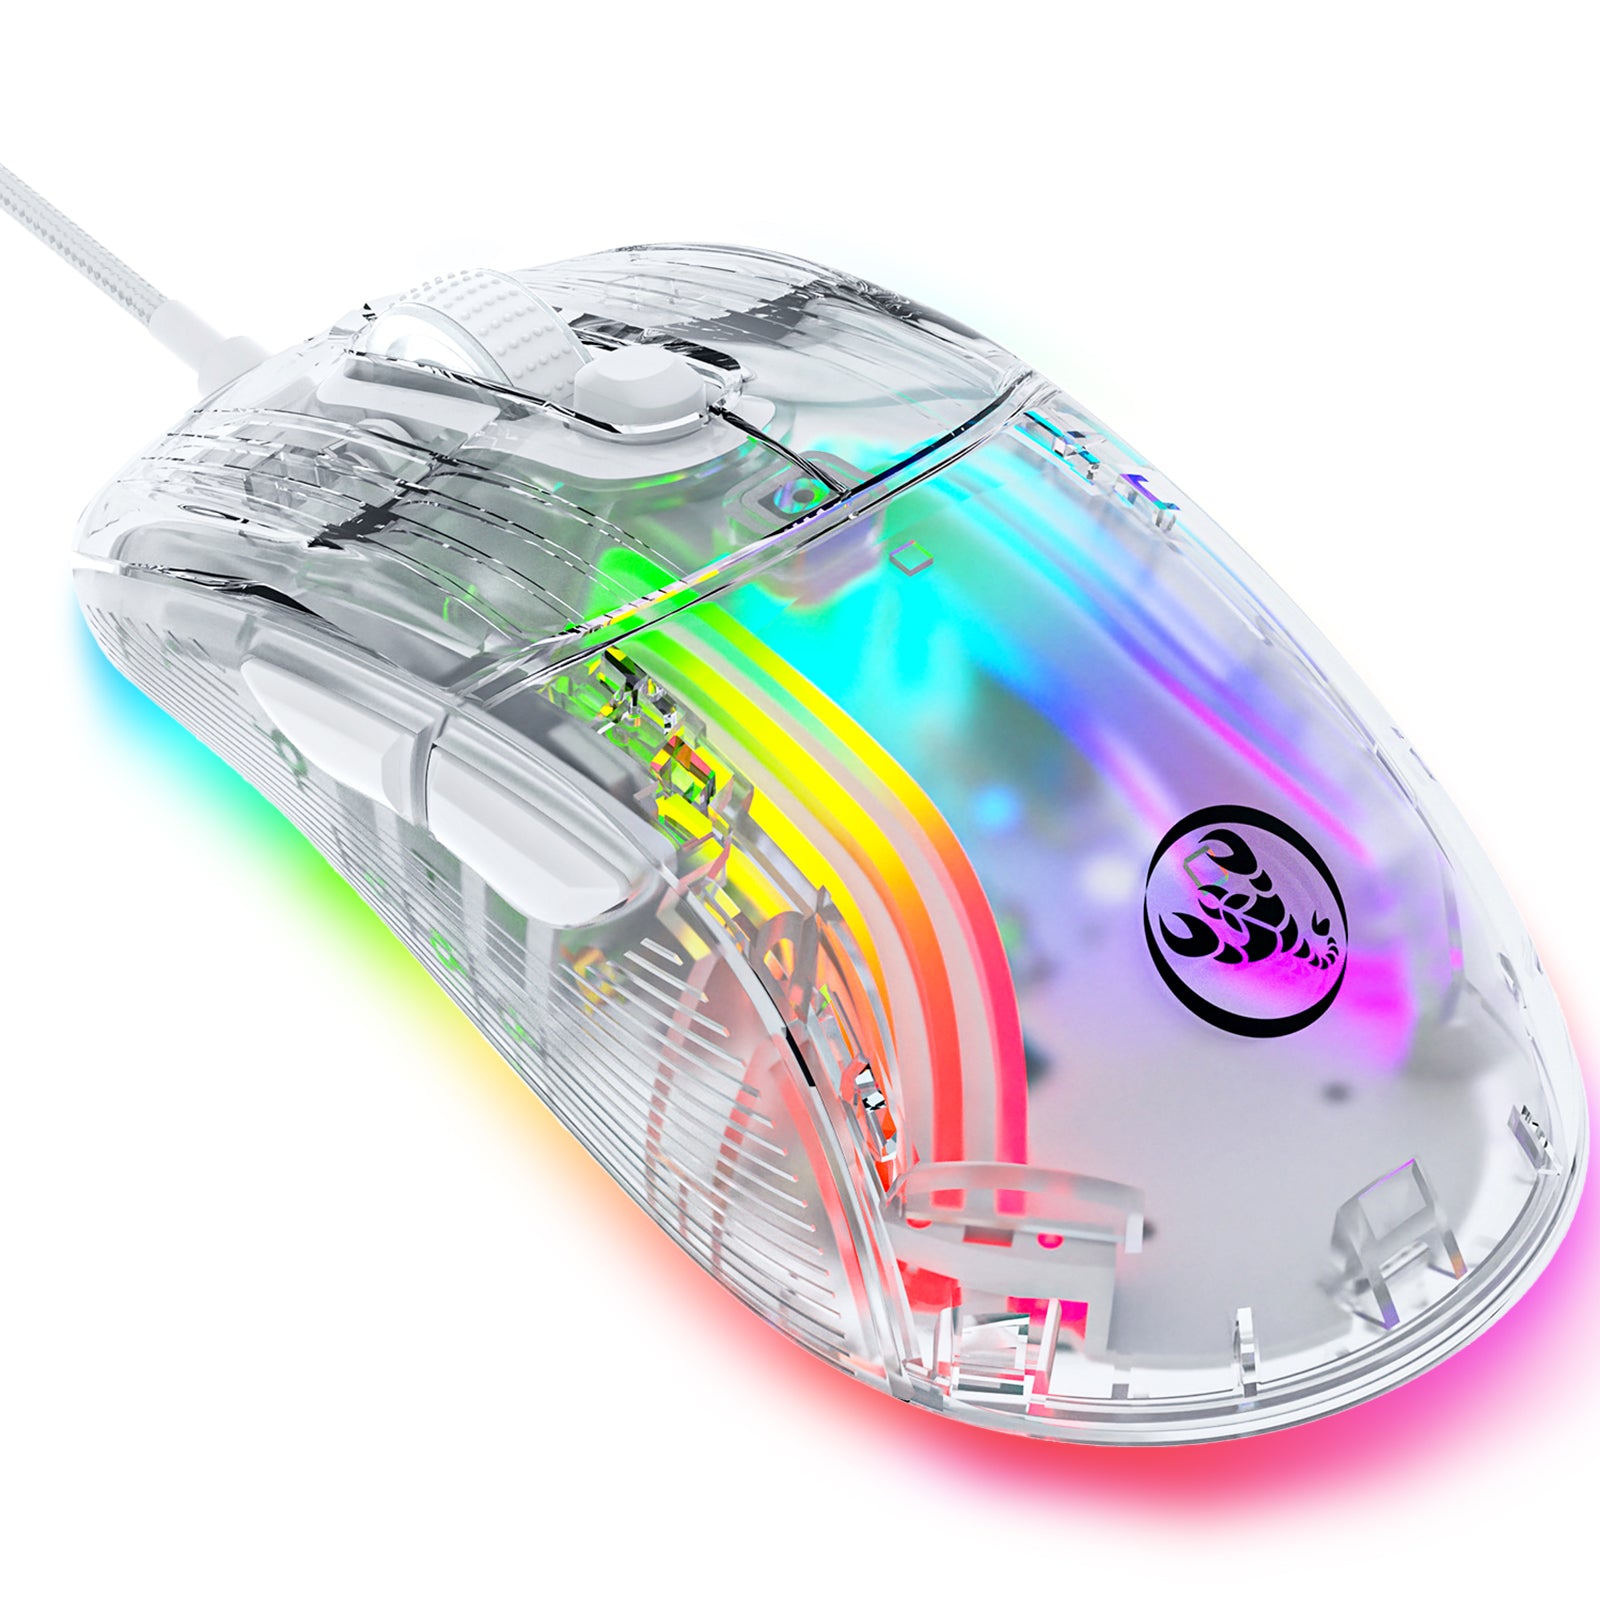 HXSJ X400 Transparent Mouse, Ultralight Wired Mouse, 13 RGB Bac